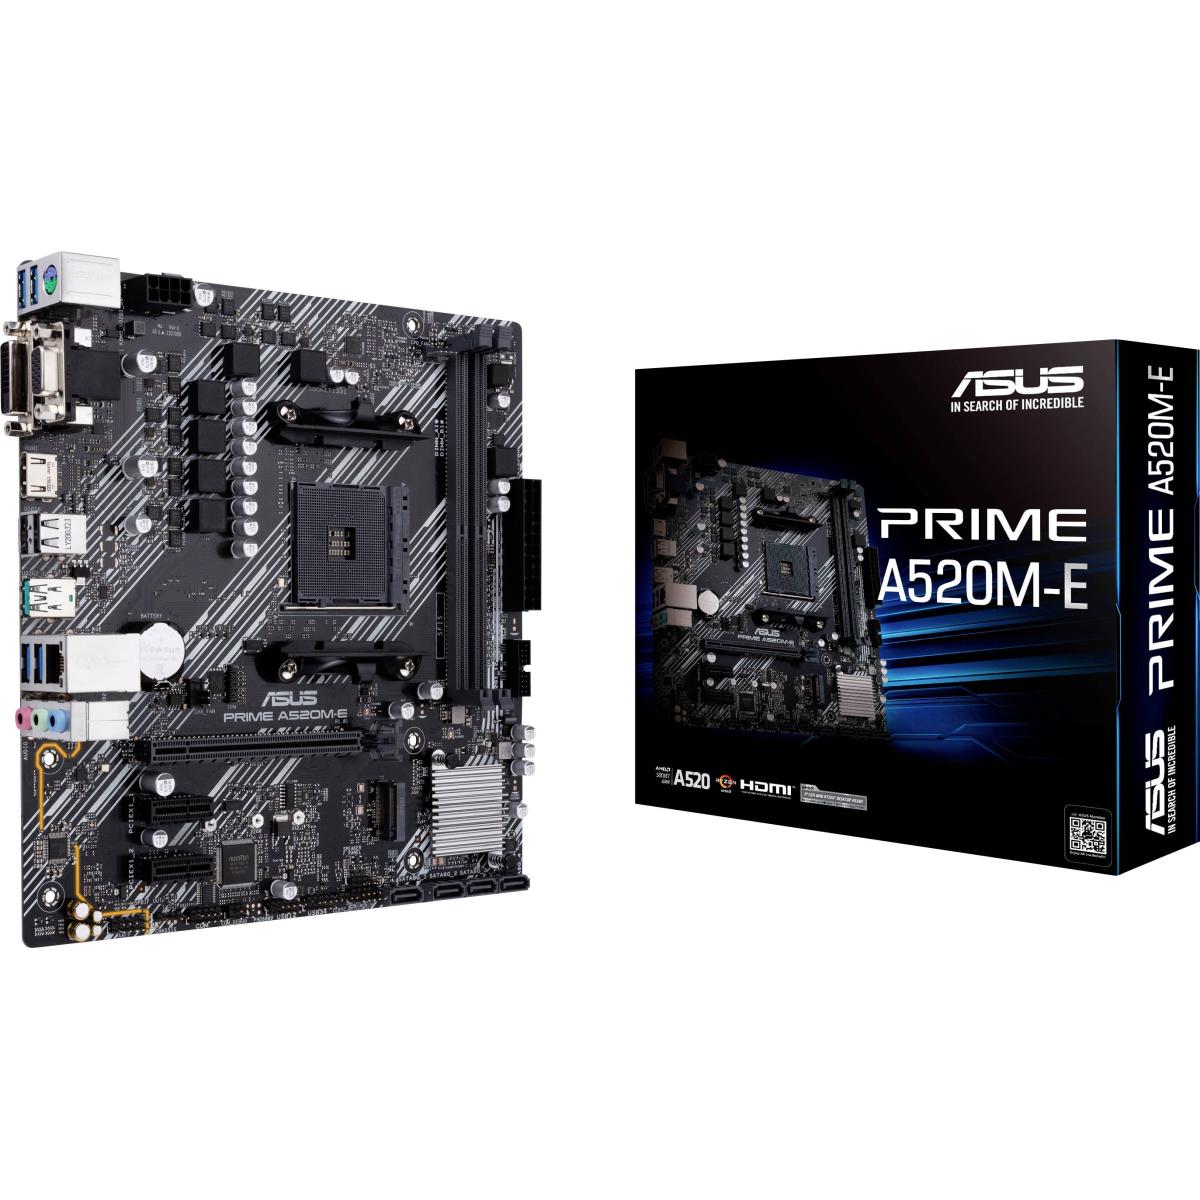 Asus Prime A520M-E AMD A520 (Ryzen AM4) Micro ATX Motherboard with M.2 Slot USB 3.2 Gen 2 Type-A